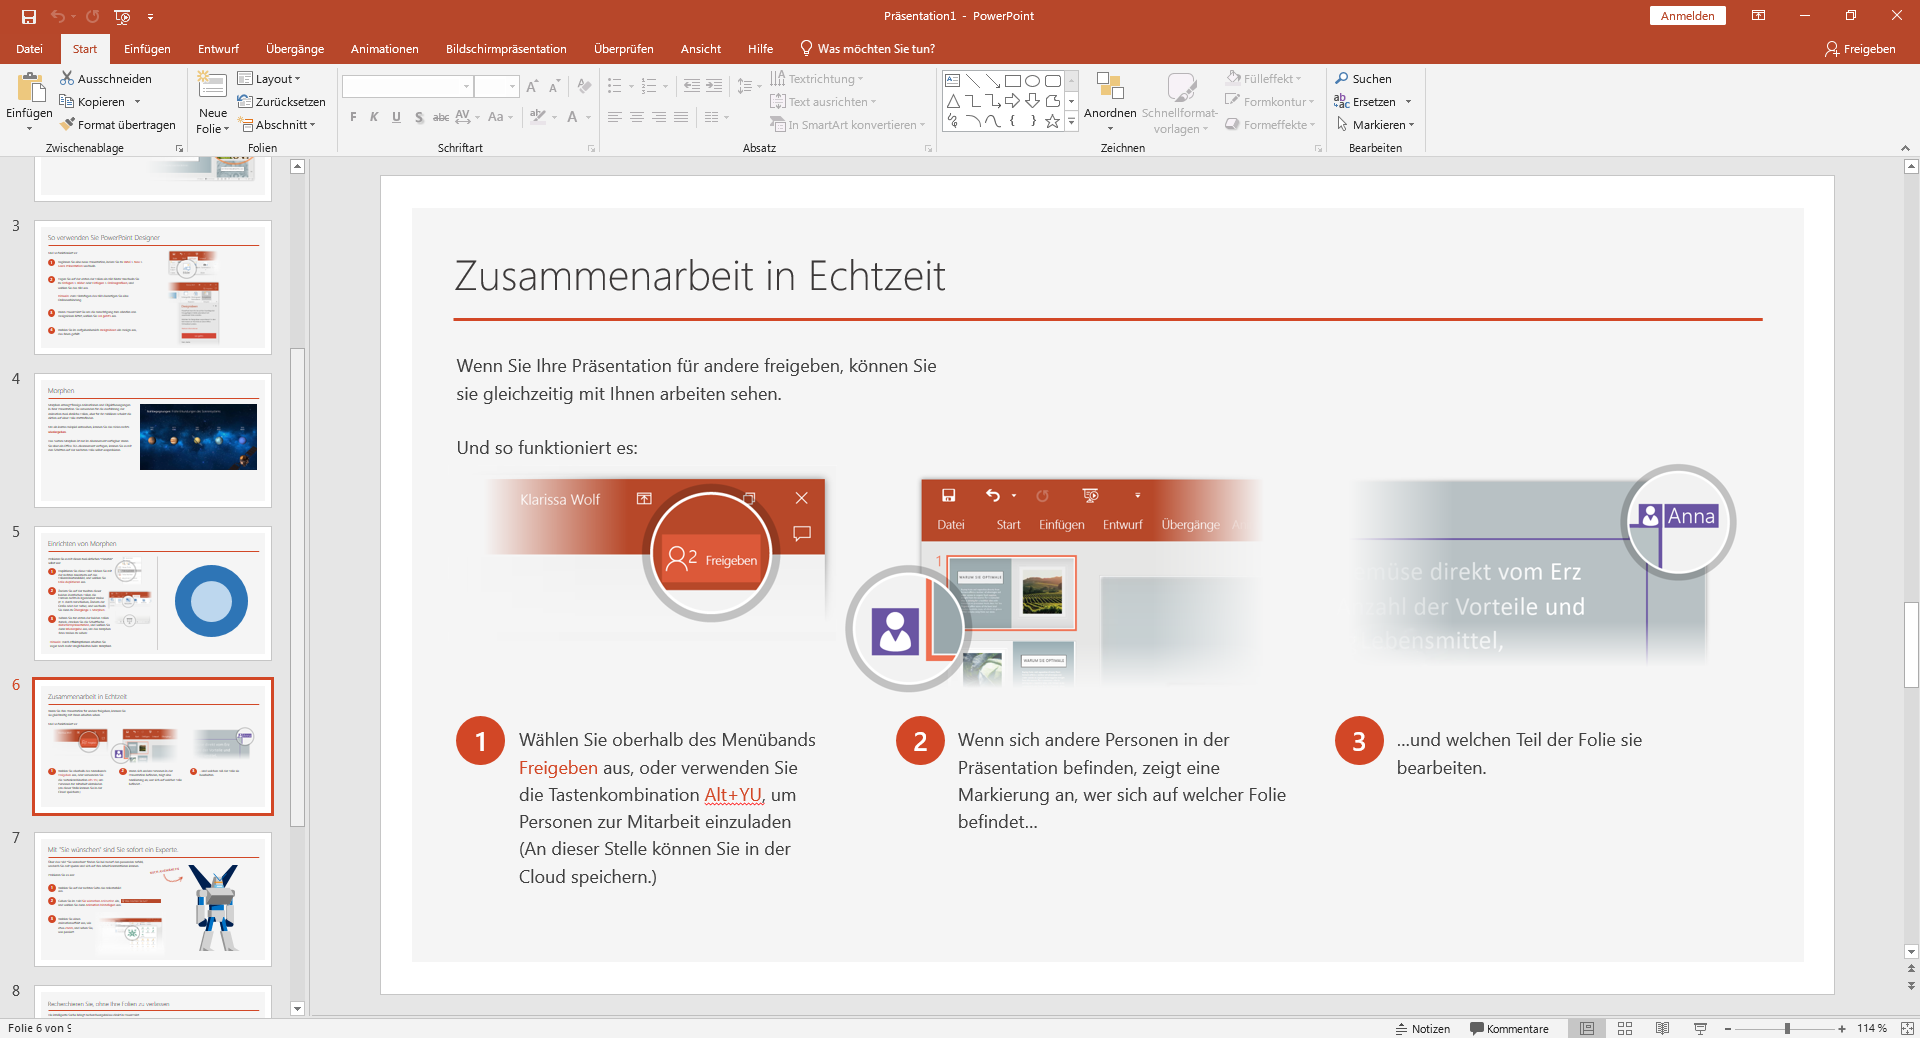 powerpoint 2019 free download for windows 7